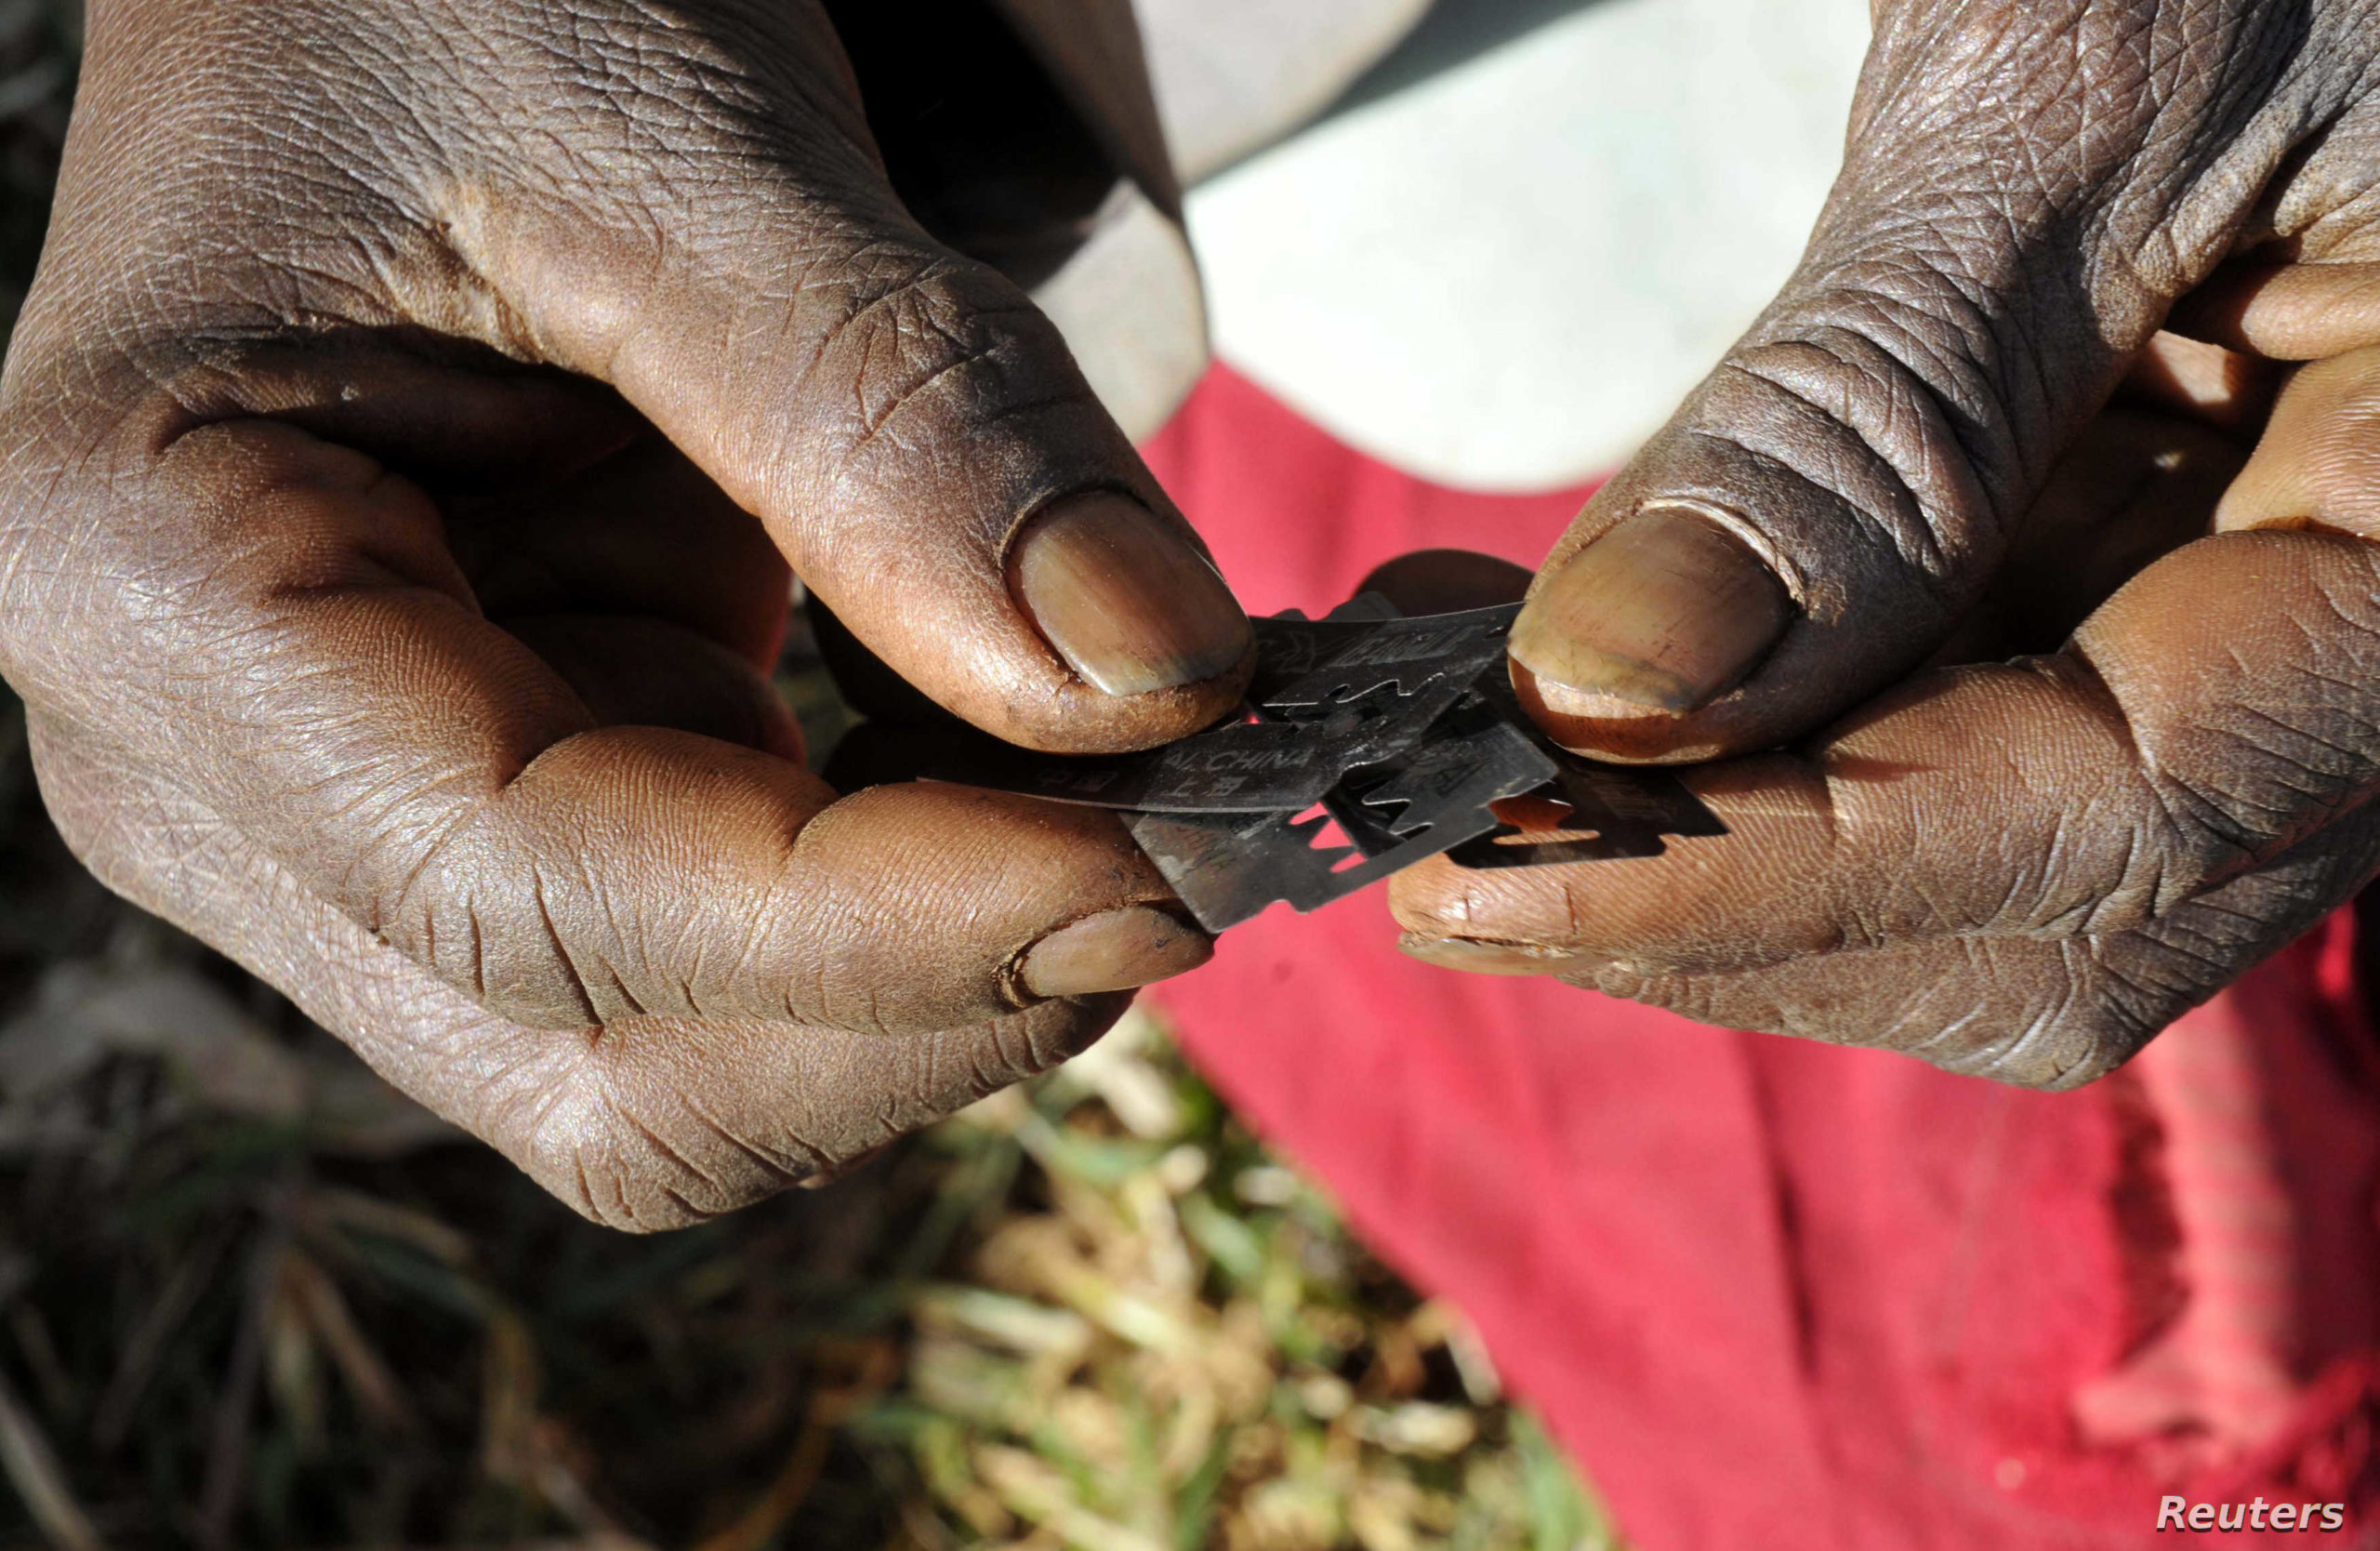 Prisca Korein, a 62-year-old traditional surgeon, holds razor blades before carrying out female genital mutilation on teenage girls from the Sebei tribe in Bukwa district, about 357 kms (214 miles) northeast of Kampala, December 15, 2008. The ceremony was to initiate the teenagers into womanhood according to Sebei traditional rites. REUTERS/James Akena (UGANDA) - RTR22M64